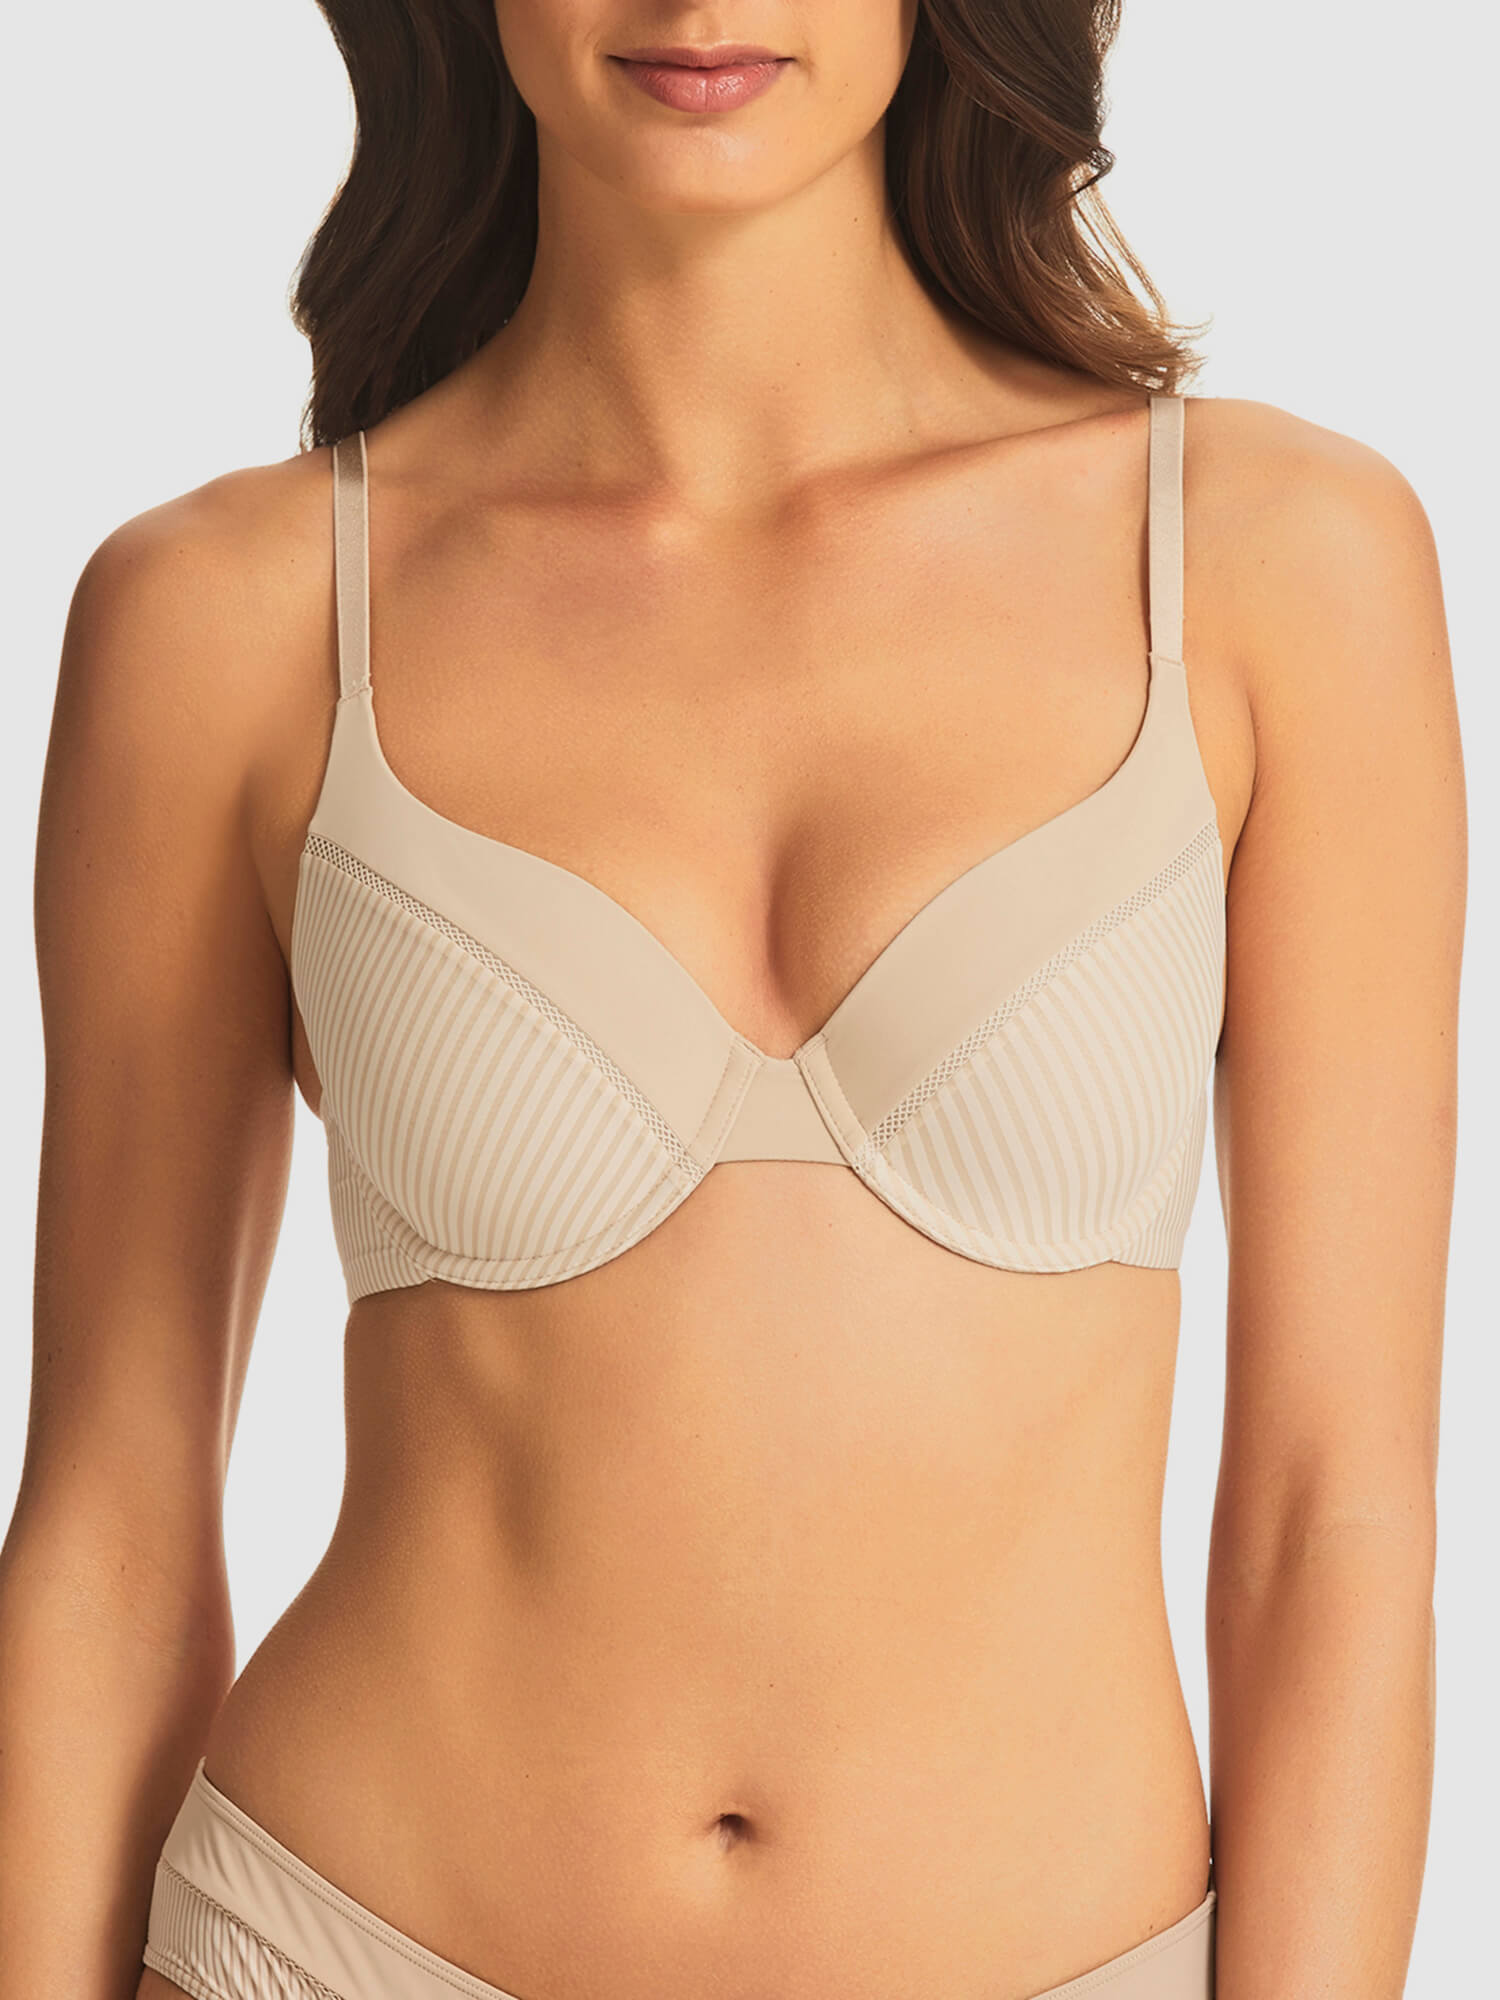 This Is Why Your Bra Band Rides Up Your Back - ParfaitLingerie.com - Blog